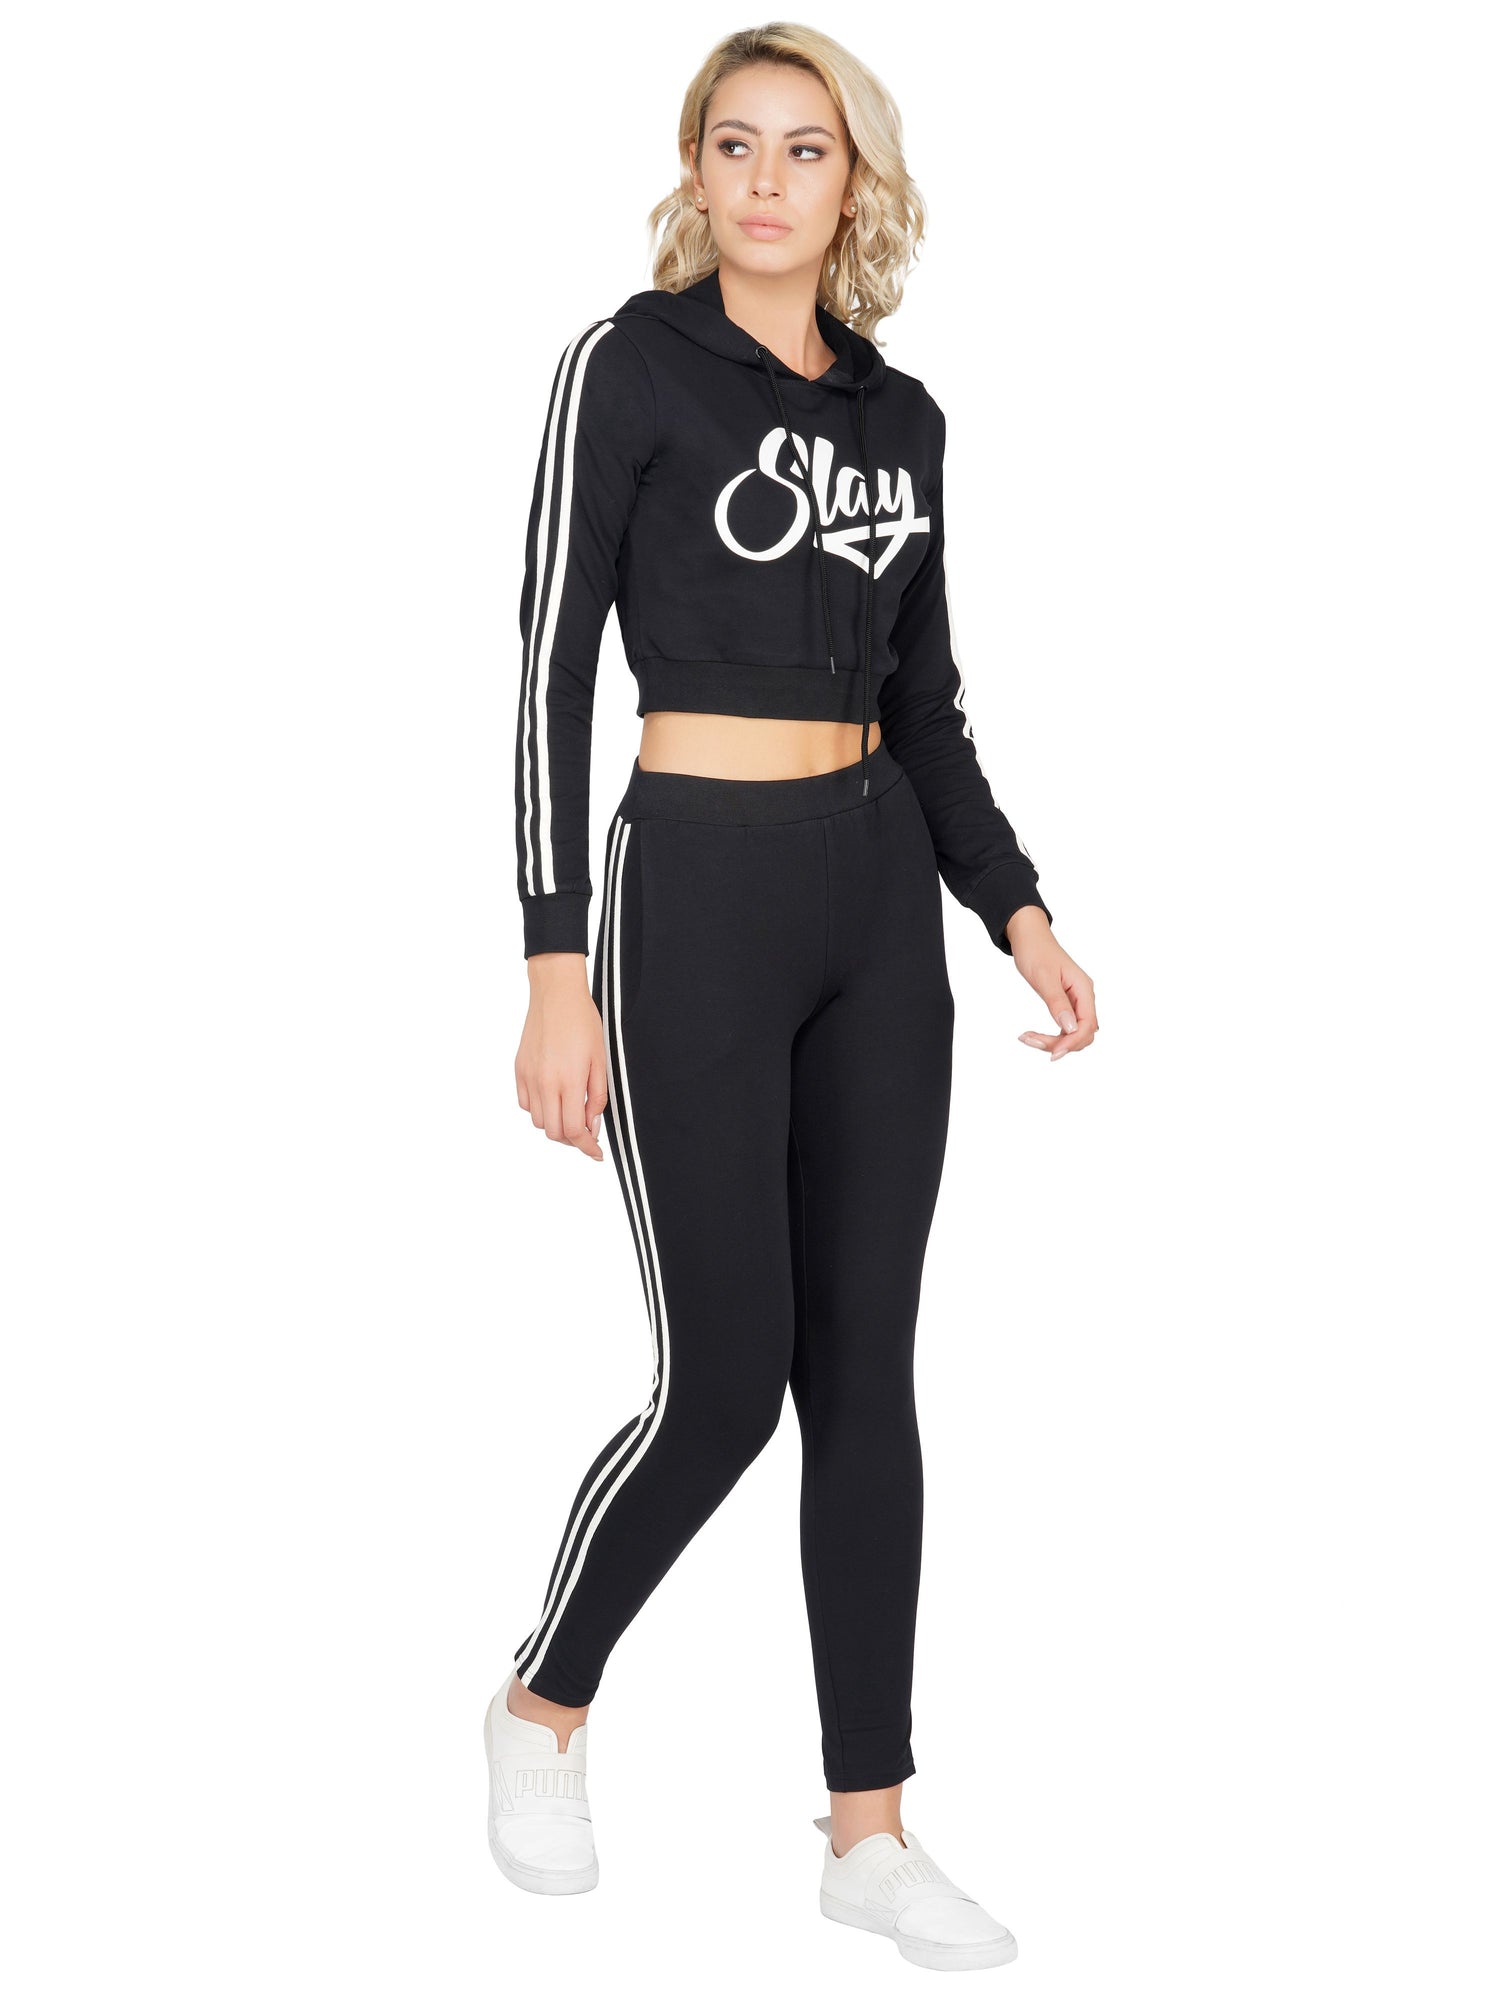 SLAY. Sport Women's Black Printed Tracksuit with White Side Stripes-clothing-to-slay.myshopify.com-Tracksuit